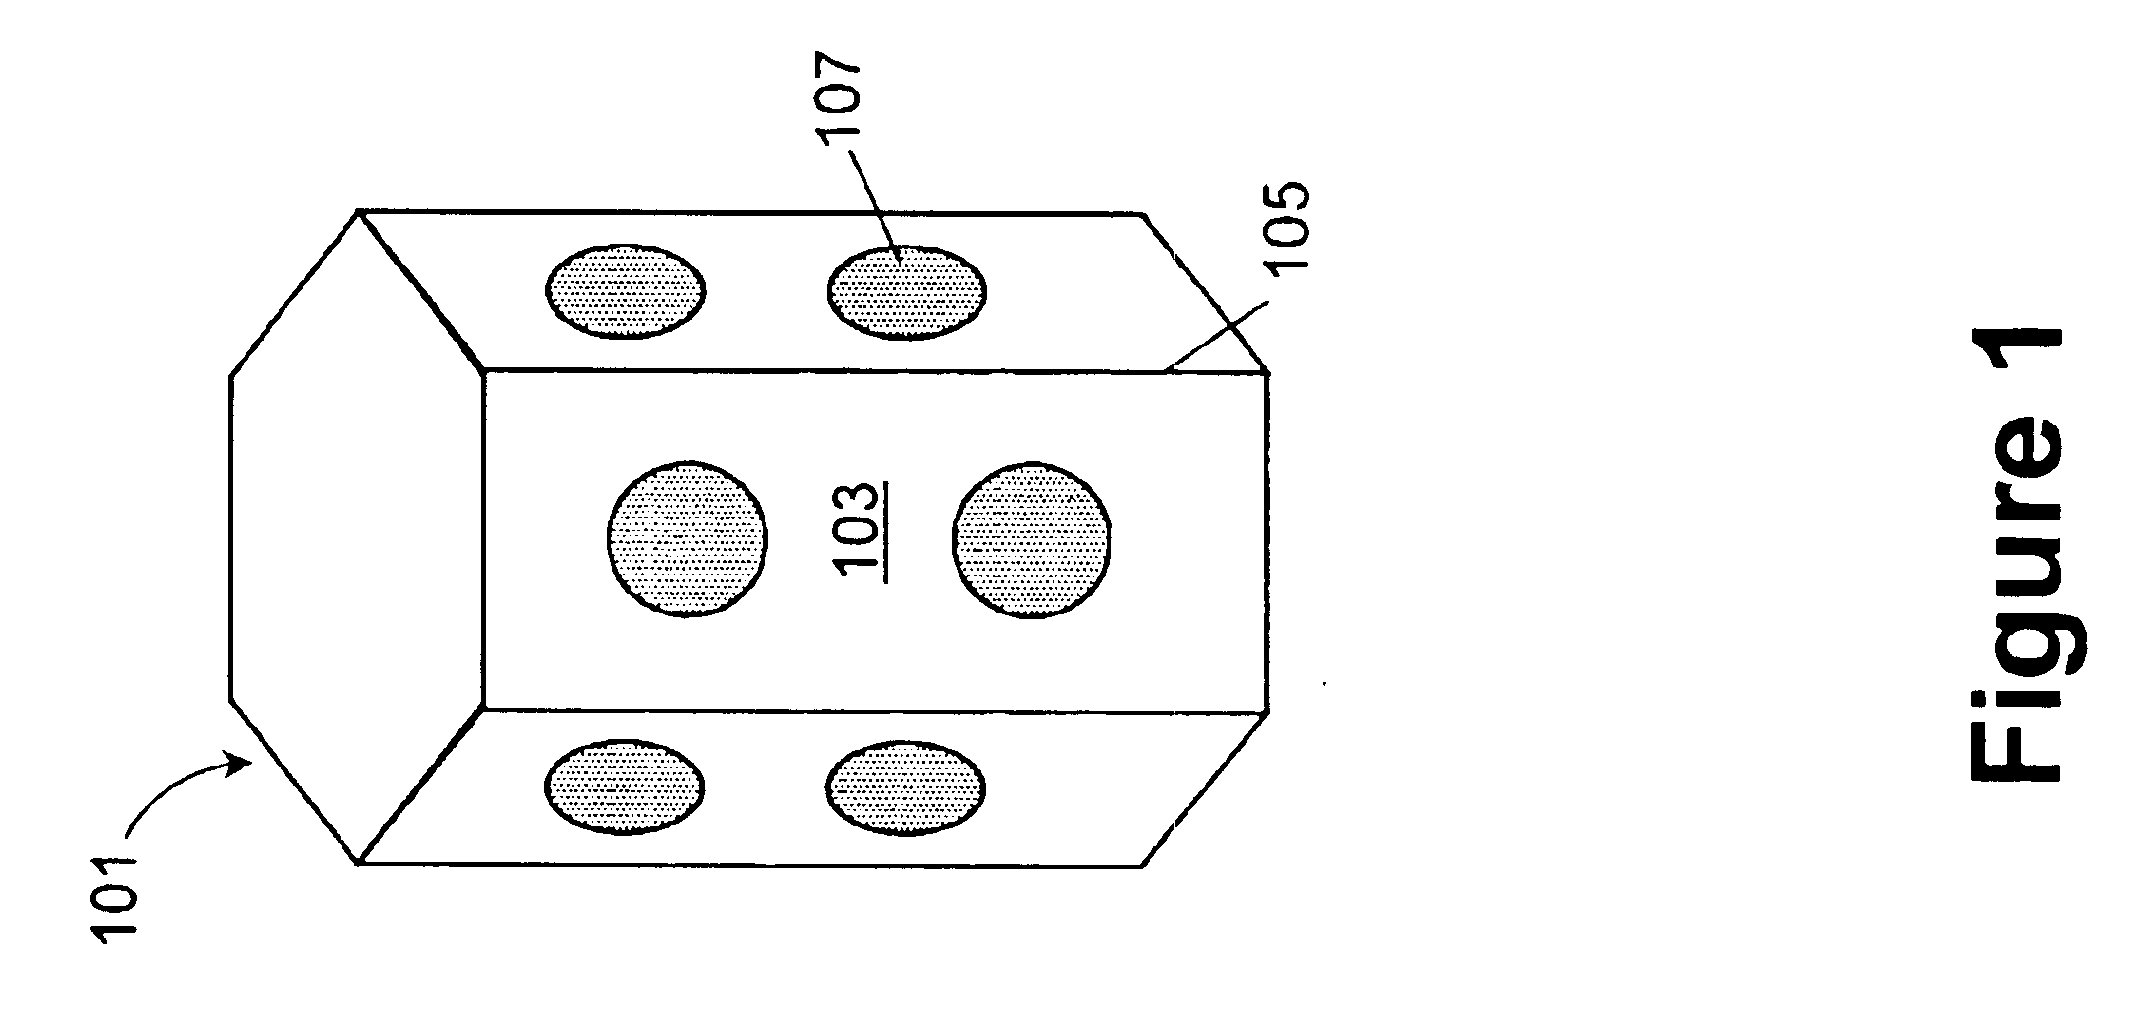 Offsetting patch antennas on an ominidirectional multi-facetted array to allow space for an interconnection board